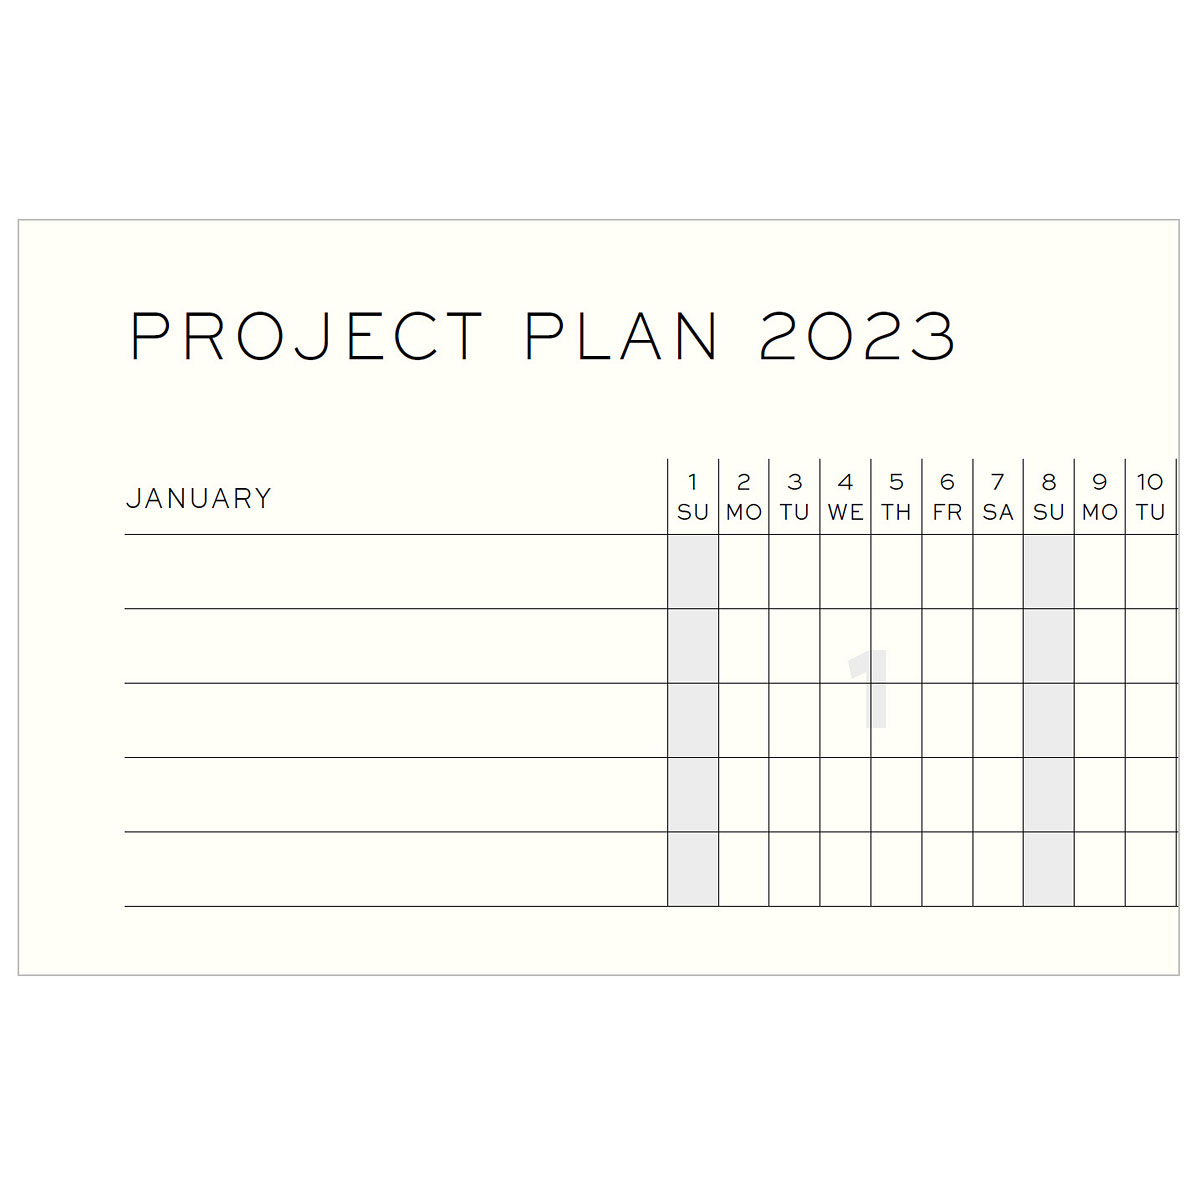 Calendar 2023 Weekly Notebook Softcover A5 Ocean in the group Paper & Pads / Planners / 12-Month Planners at Pen Store (128420)